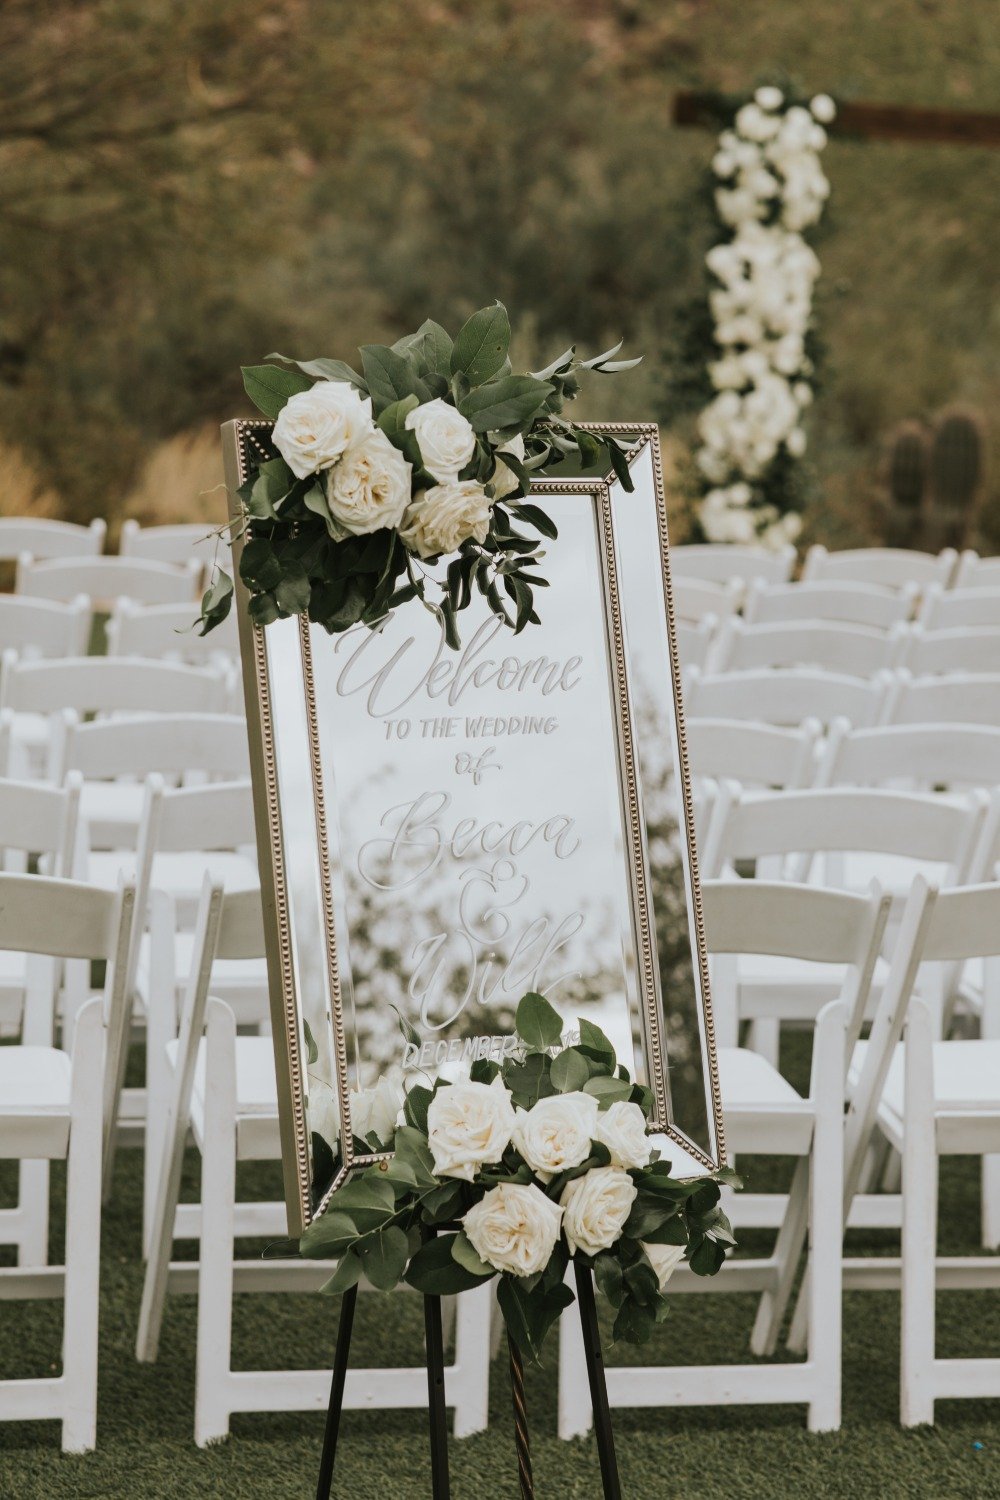 Mirror wedding sign adorned with florals